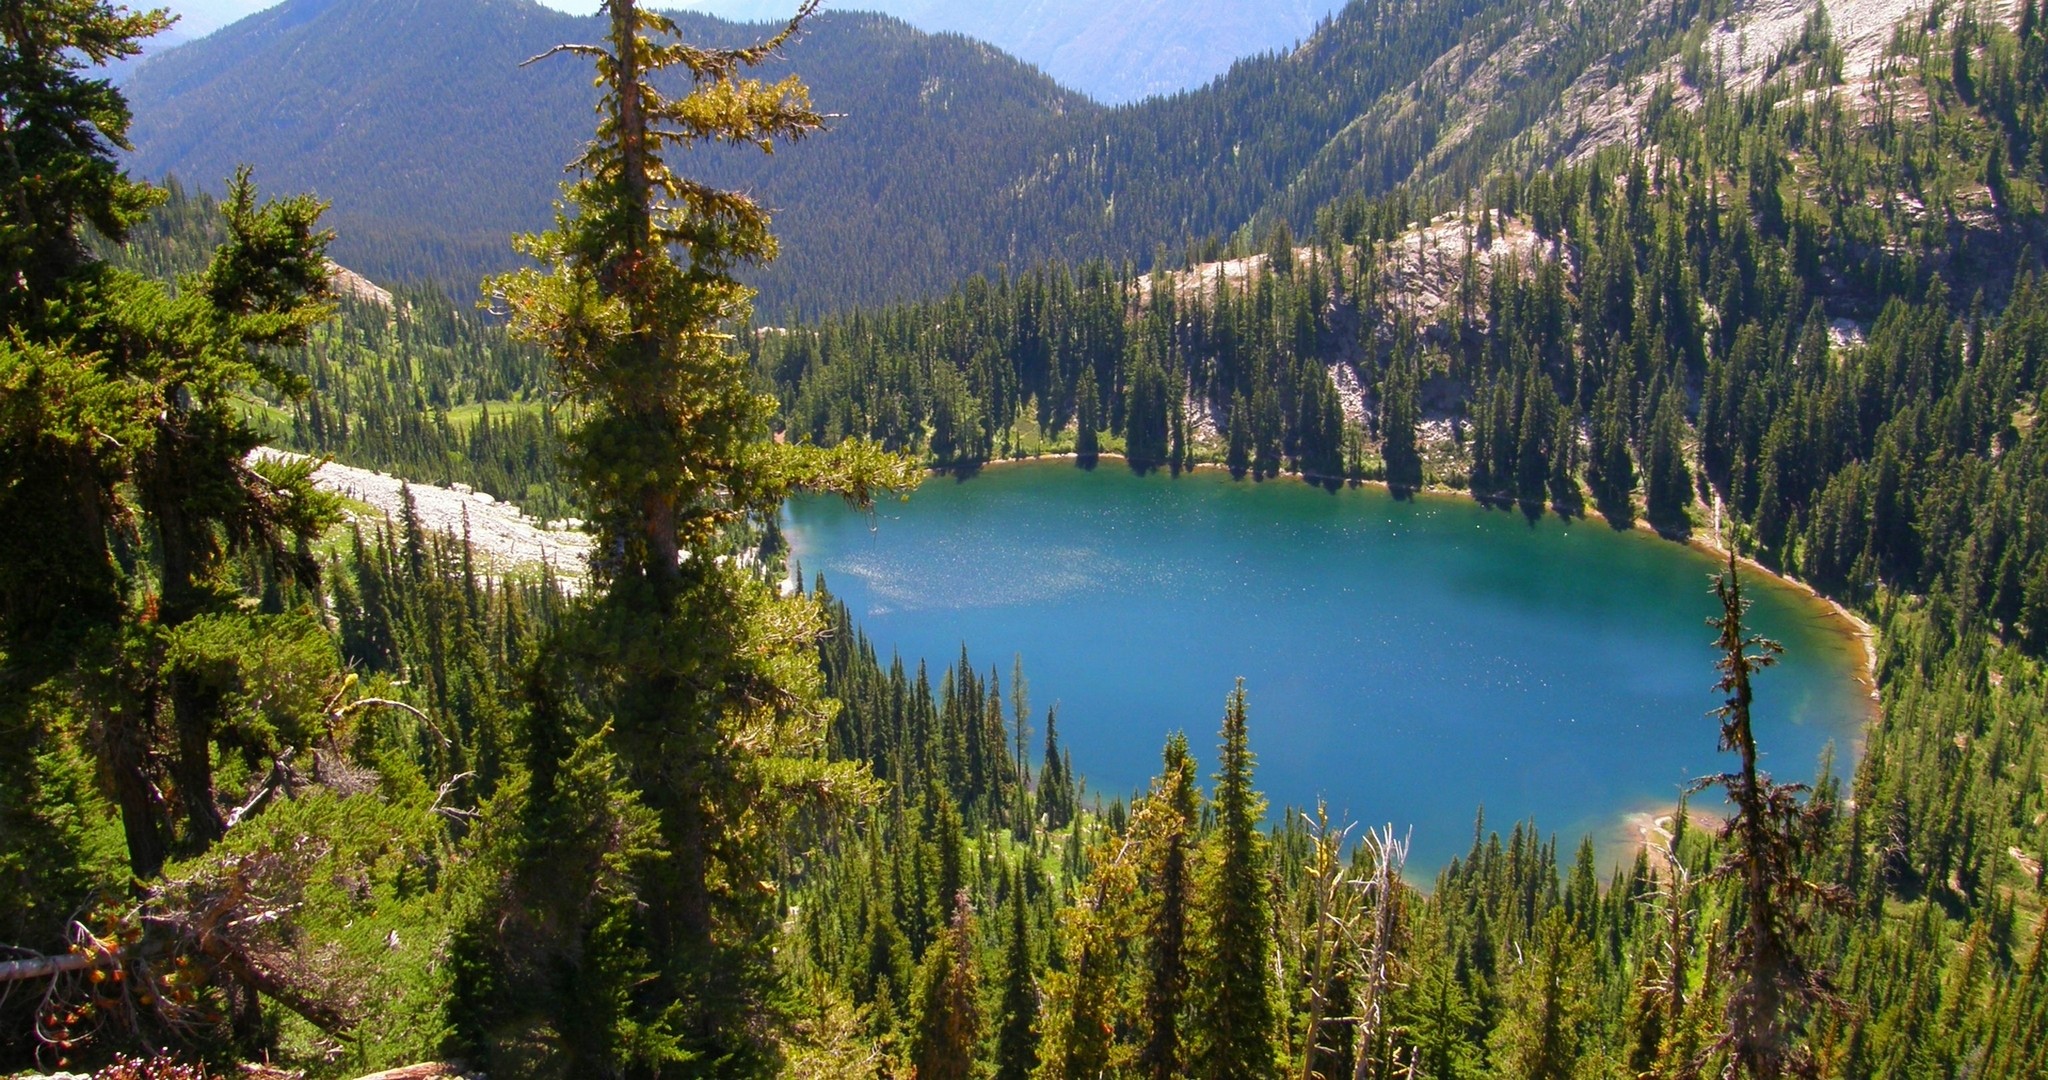 General 2048x1080 photography landscape nature lake mountains forest summer Washington (state)